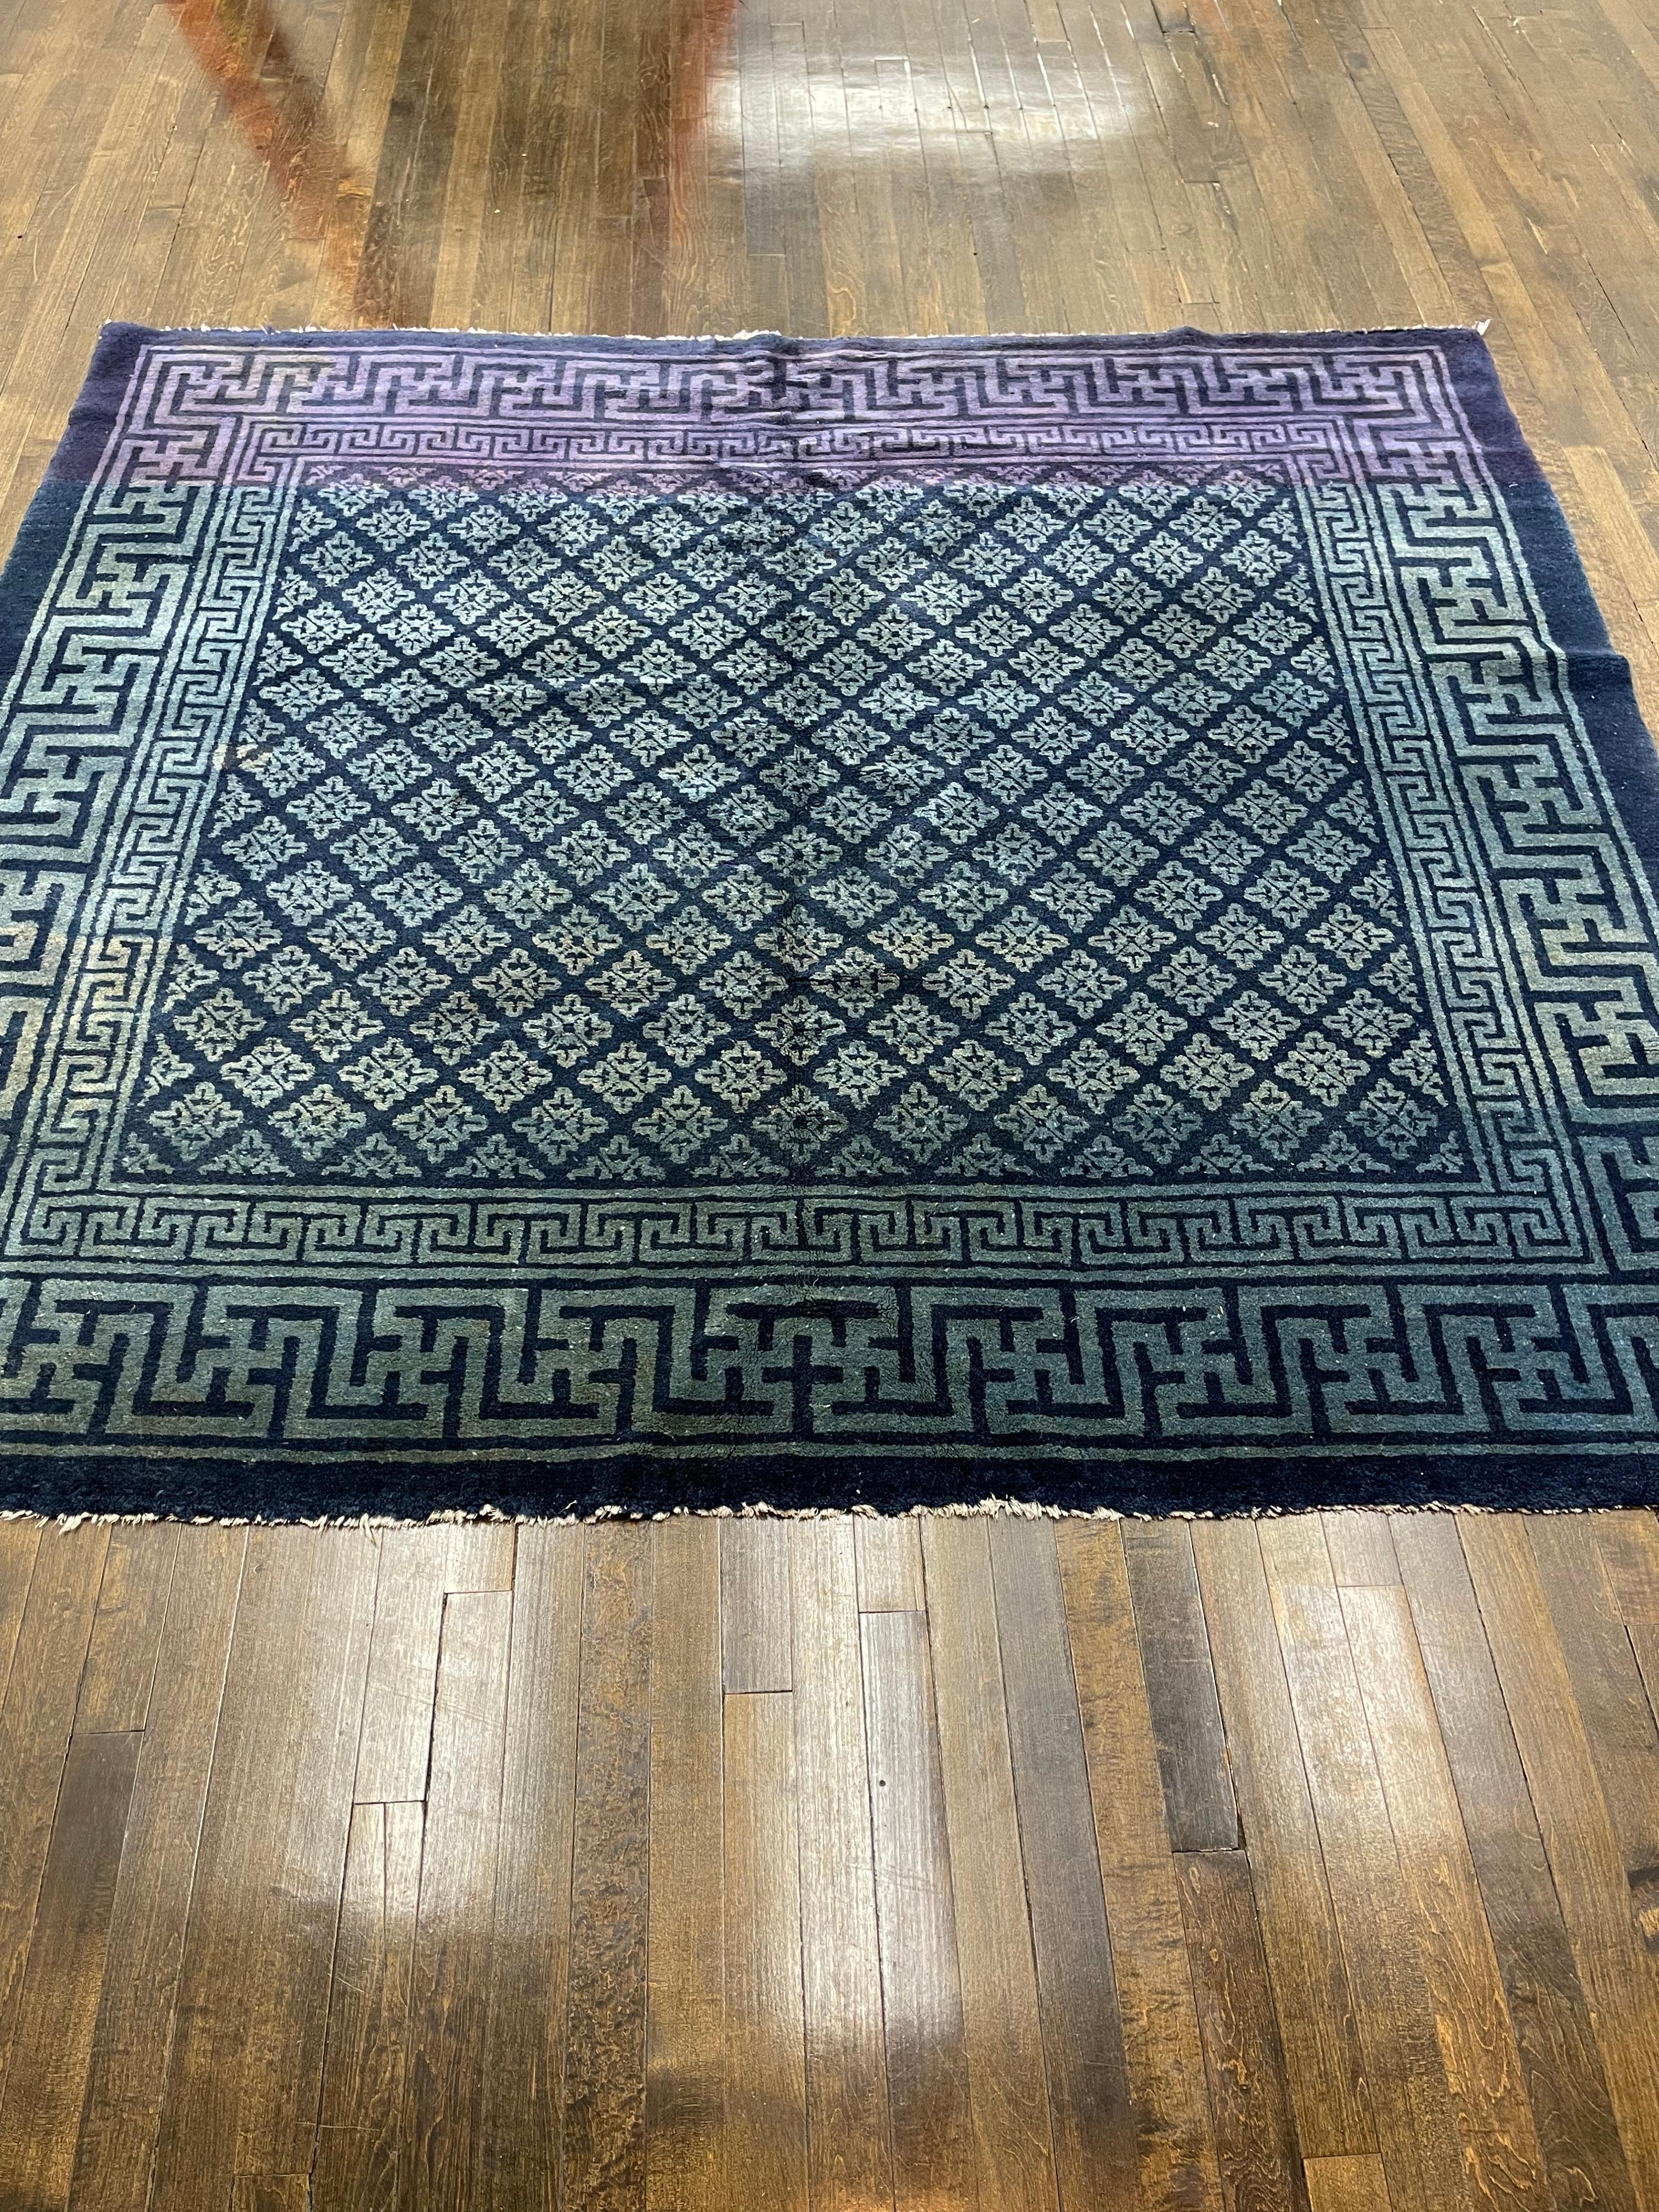 This rug was hand woven in China. A cery rare carpet known as Baotou, they come mostly in deep blue color with Abrash (natural discolorations that happen over time) and close to square in size. The 